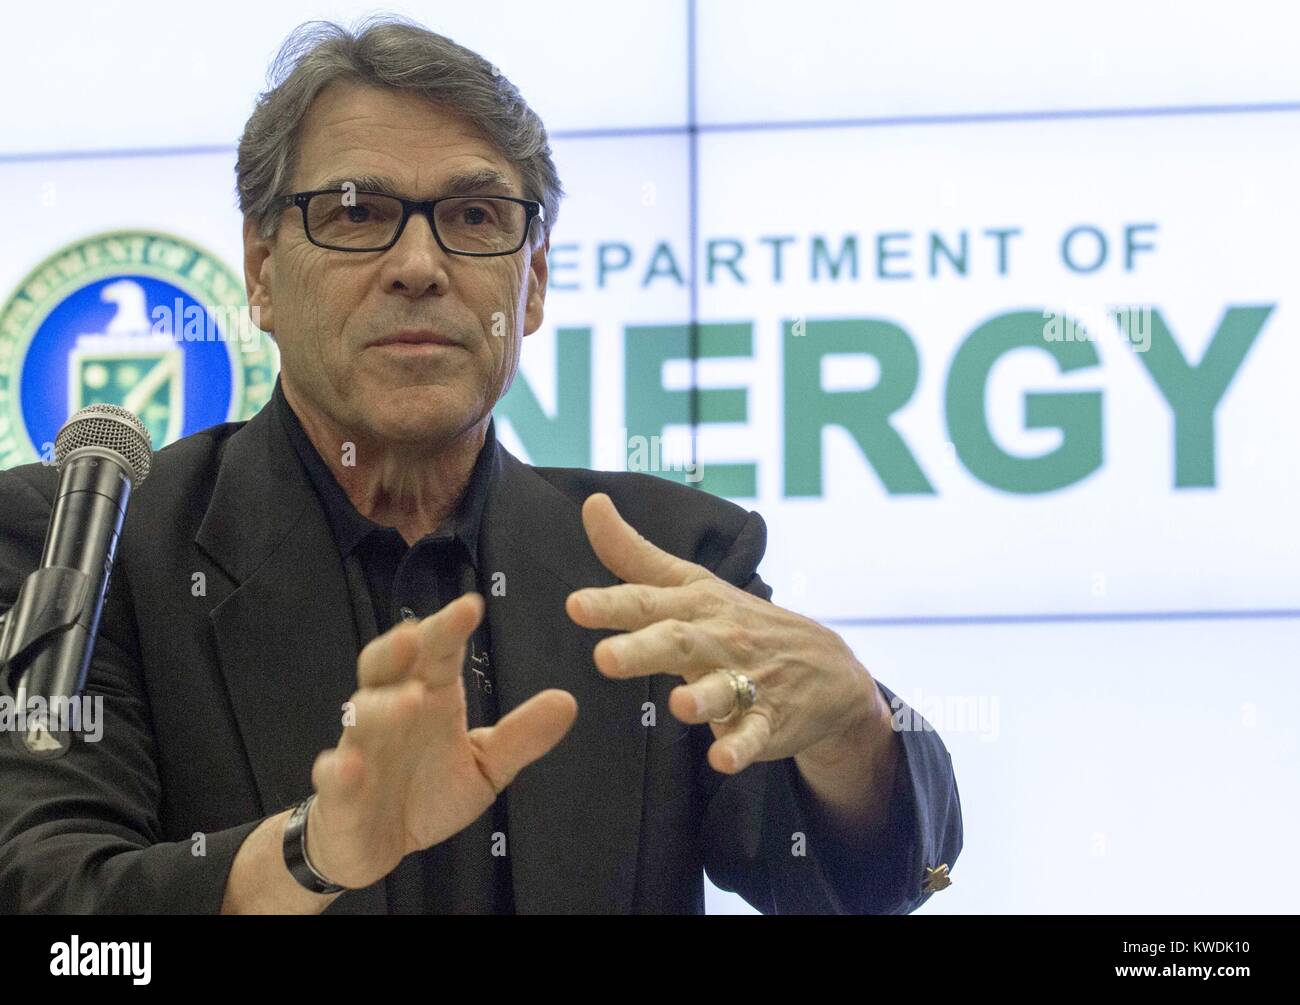 US Department of Energy Sec. Rick Perry speaking at Energy Technology Laboratory, July 7, 2017. During the 2012 Presidential campaign, the Texas Governor Perry proposed eliminating the DOE (BSLOC 2017 18 138) Stock Photo